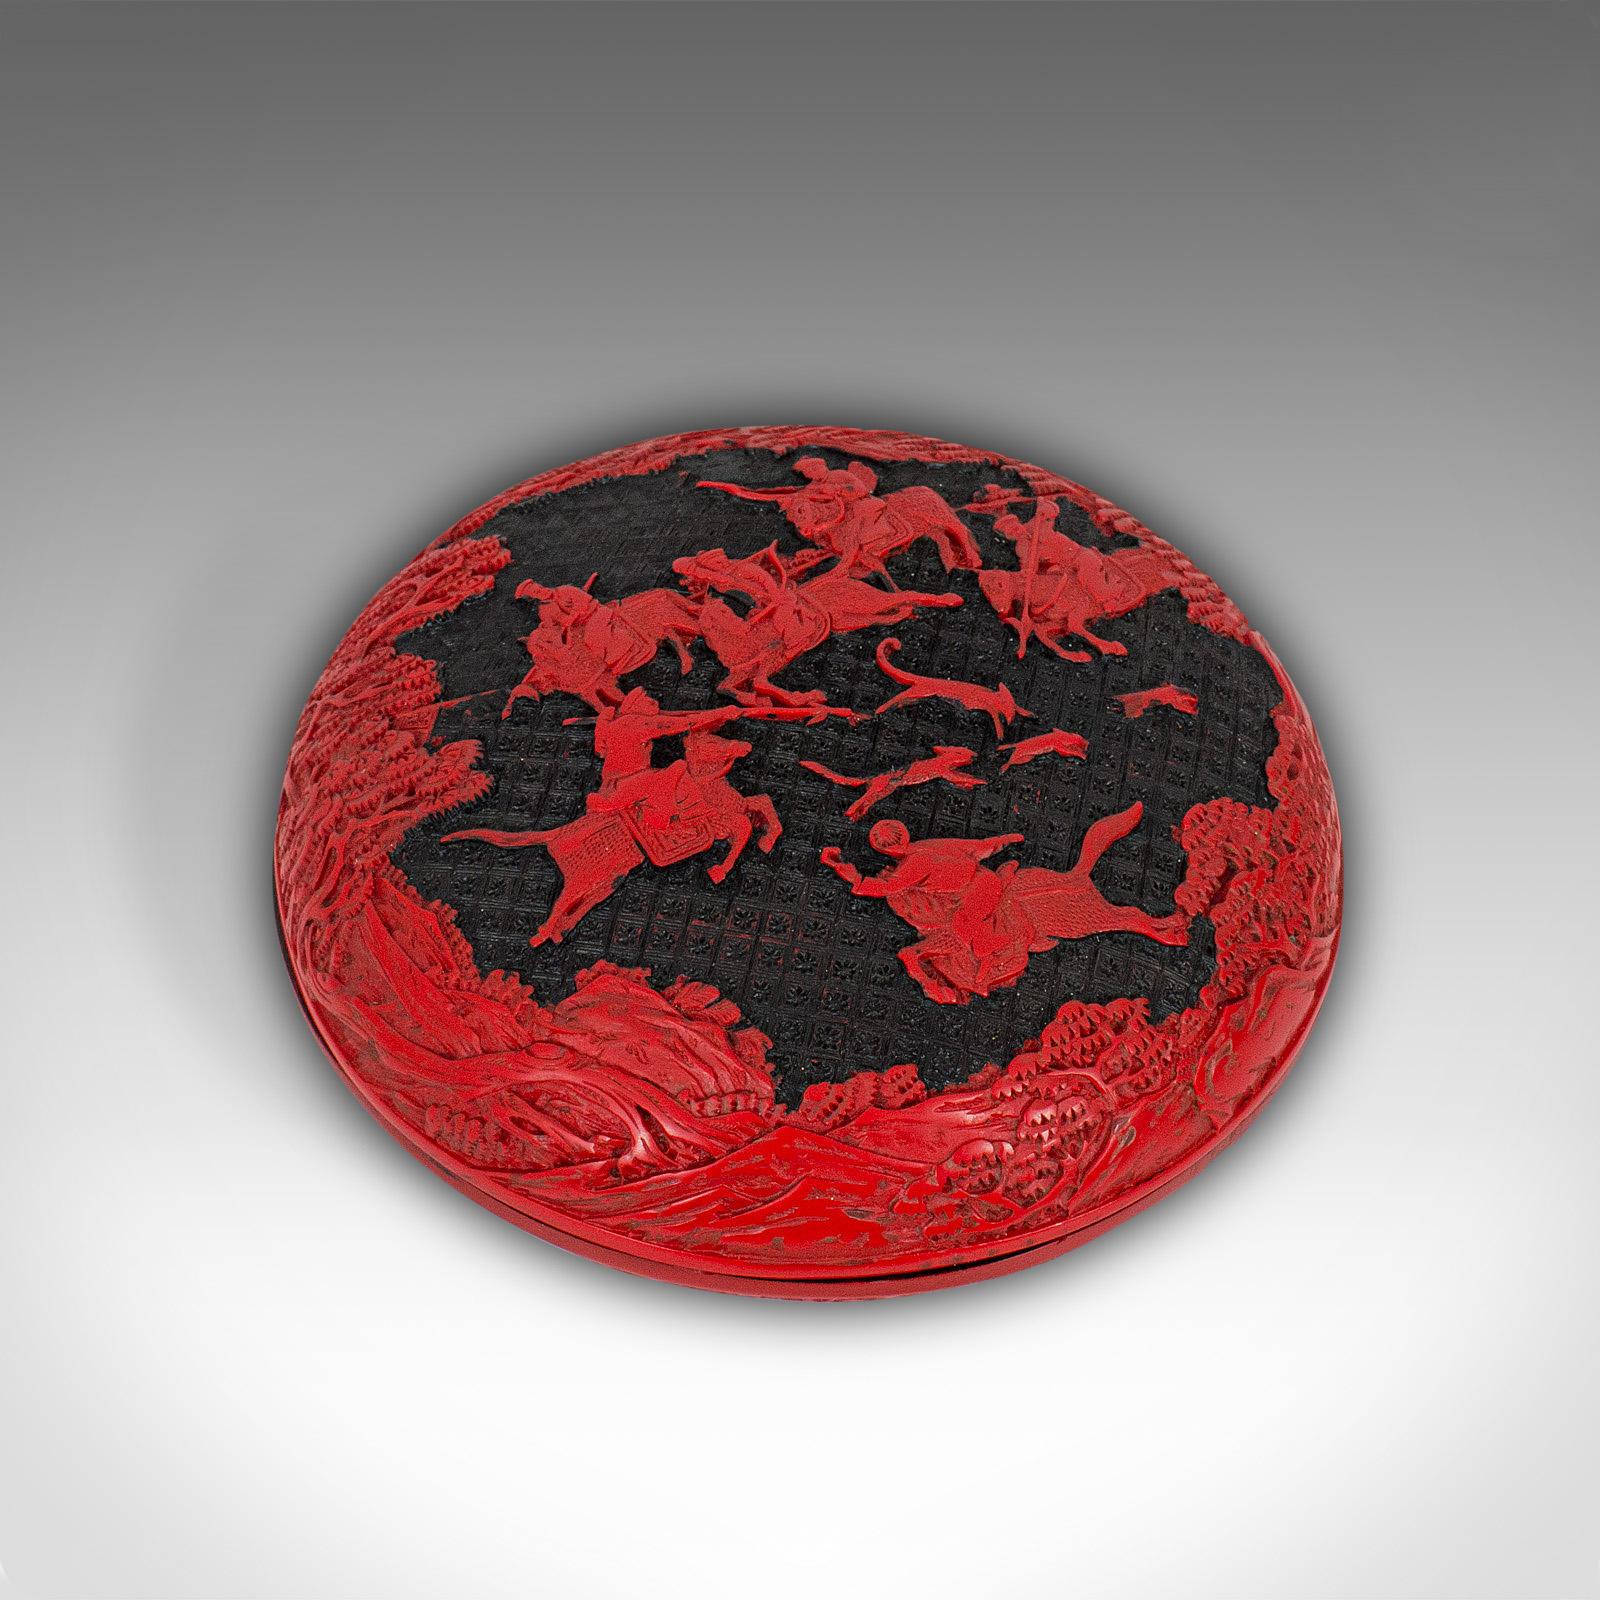 Antique Cinnabar Box, Chinese, Lacquer, Decorative Tray, Qing Dynasty circa 1900 2